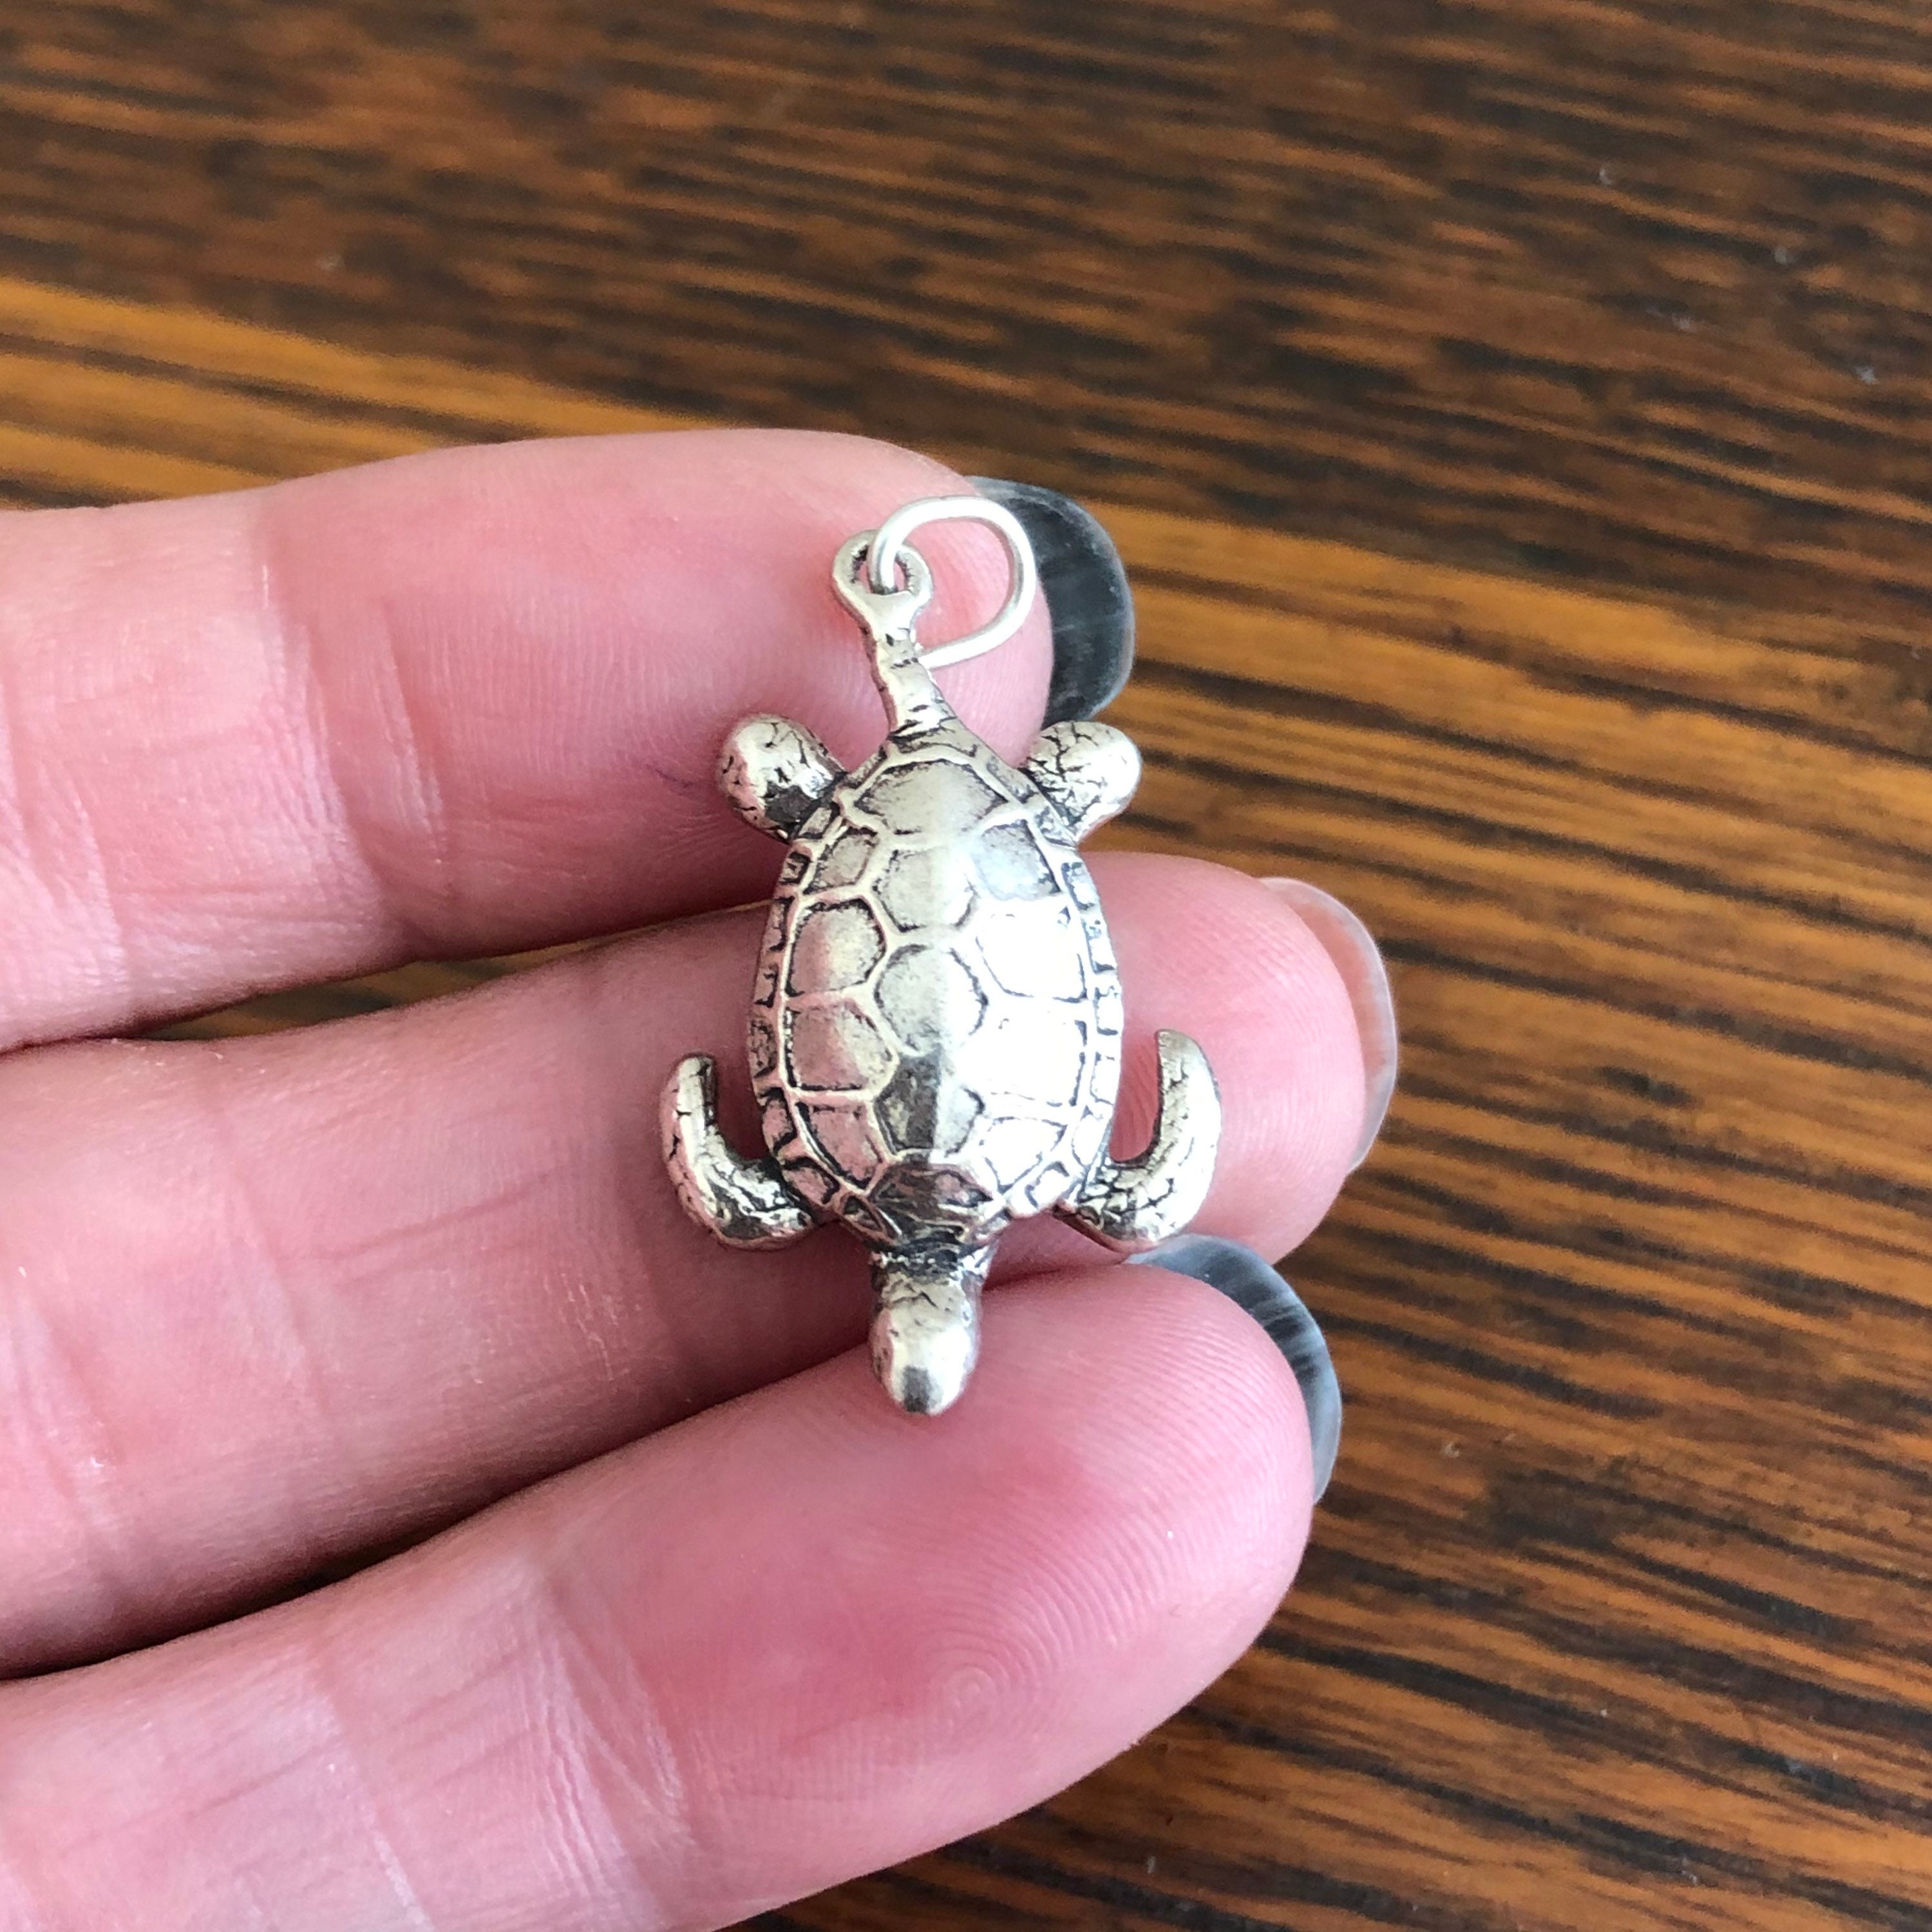 Turtle Pendant Charm 27mm Sterling Silver Jewelry Supplies | Etsy